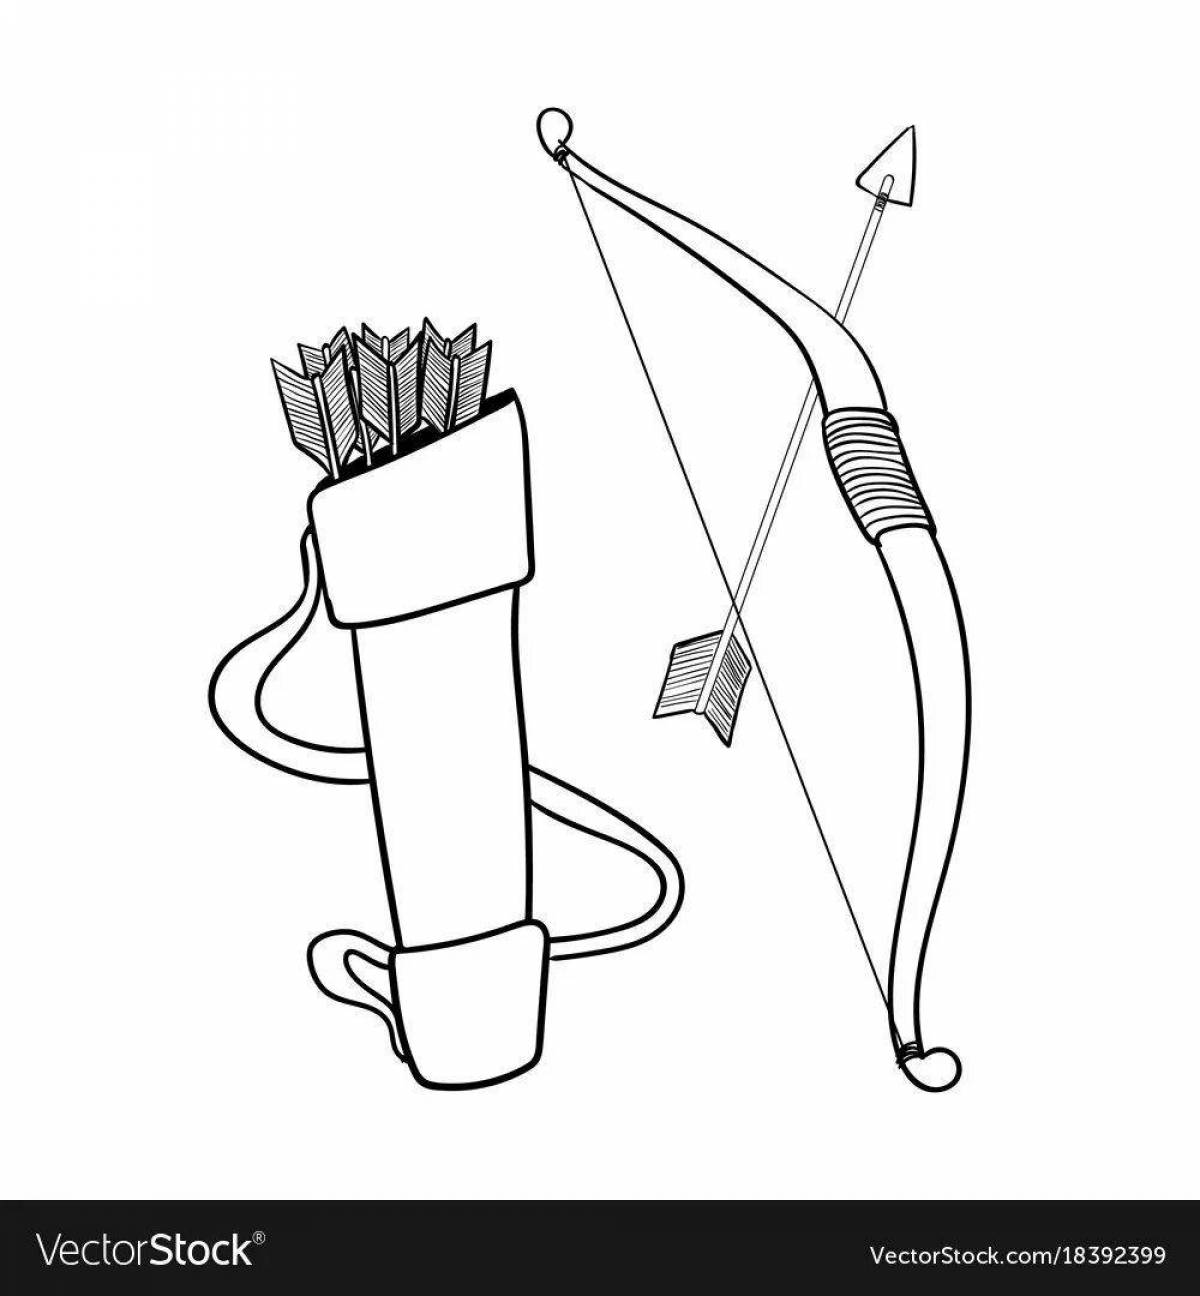 Generous bow and arrow coloring page